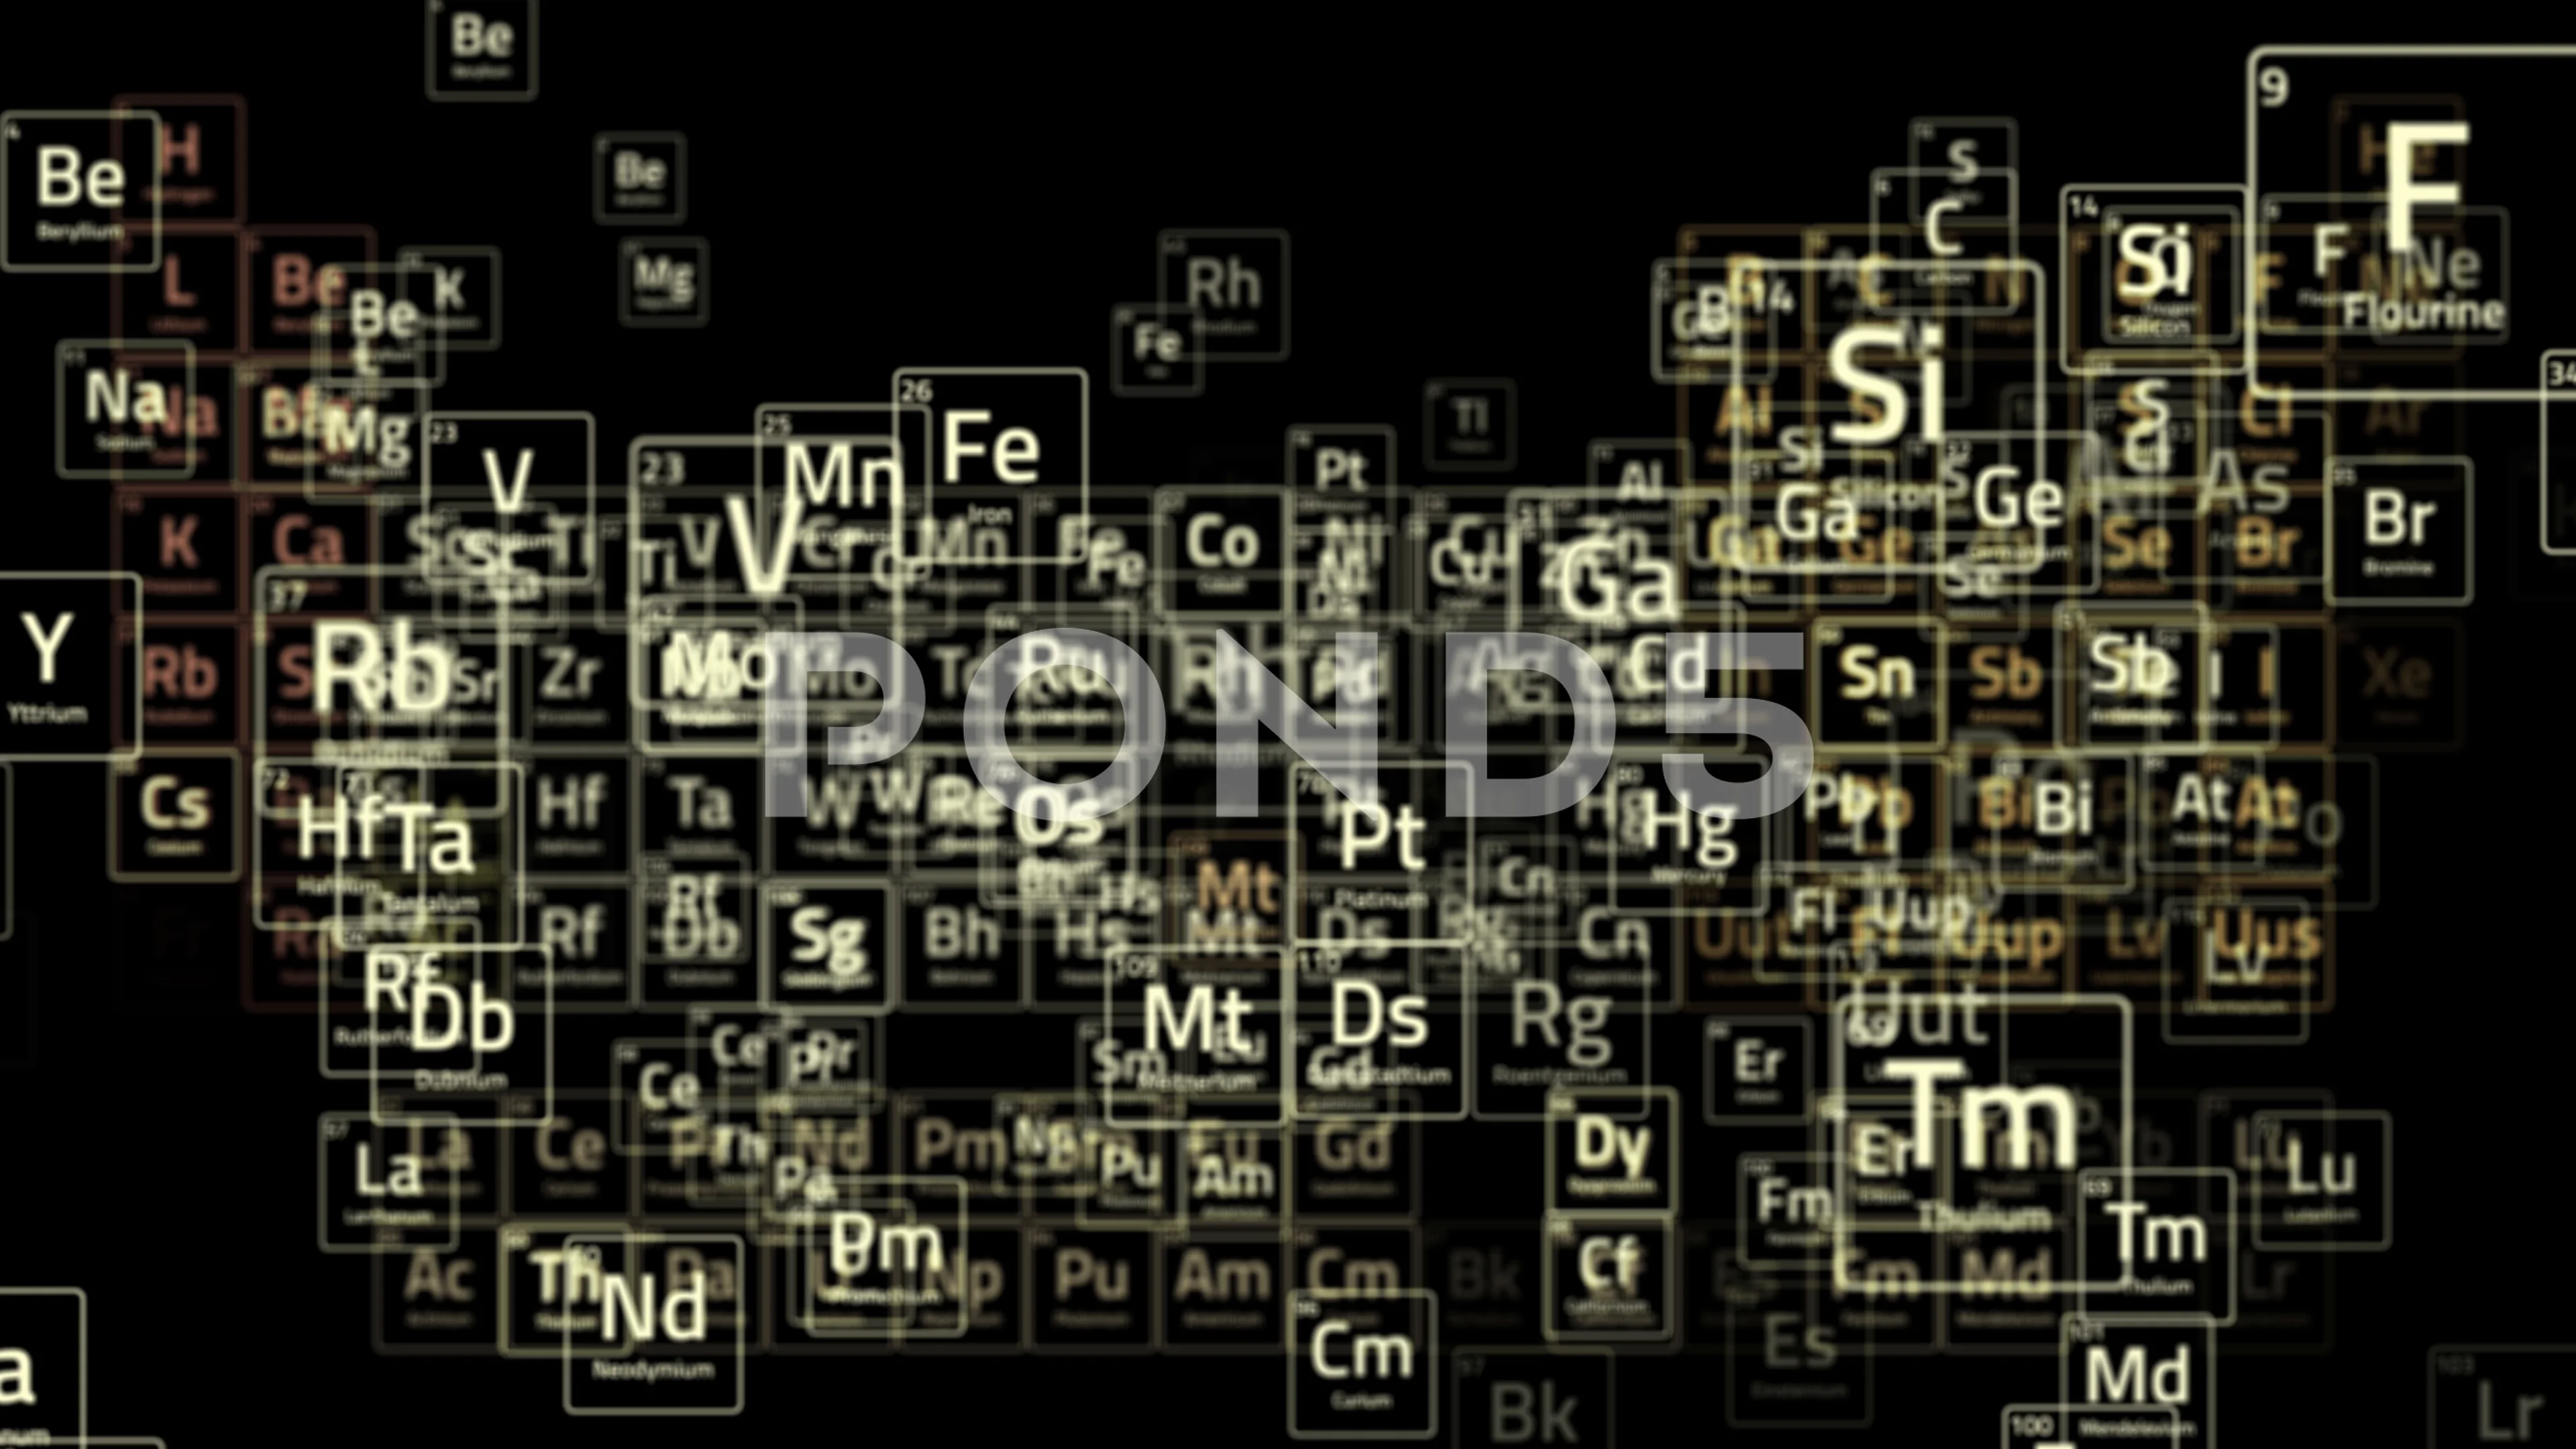 Free Printable Periodic Table of Elements Charts [Download] - Periodic Table